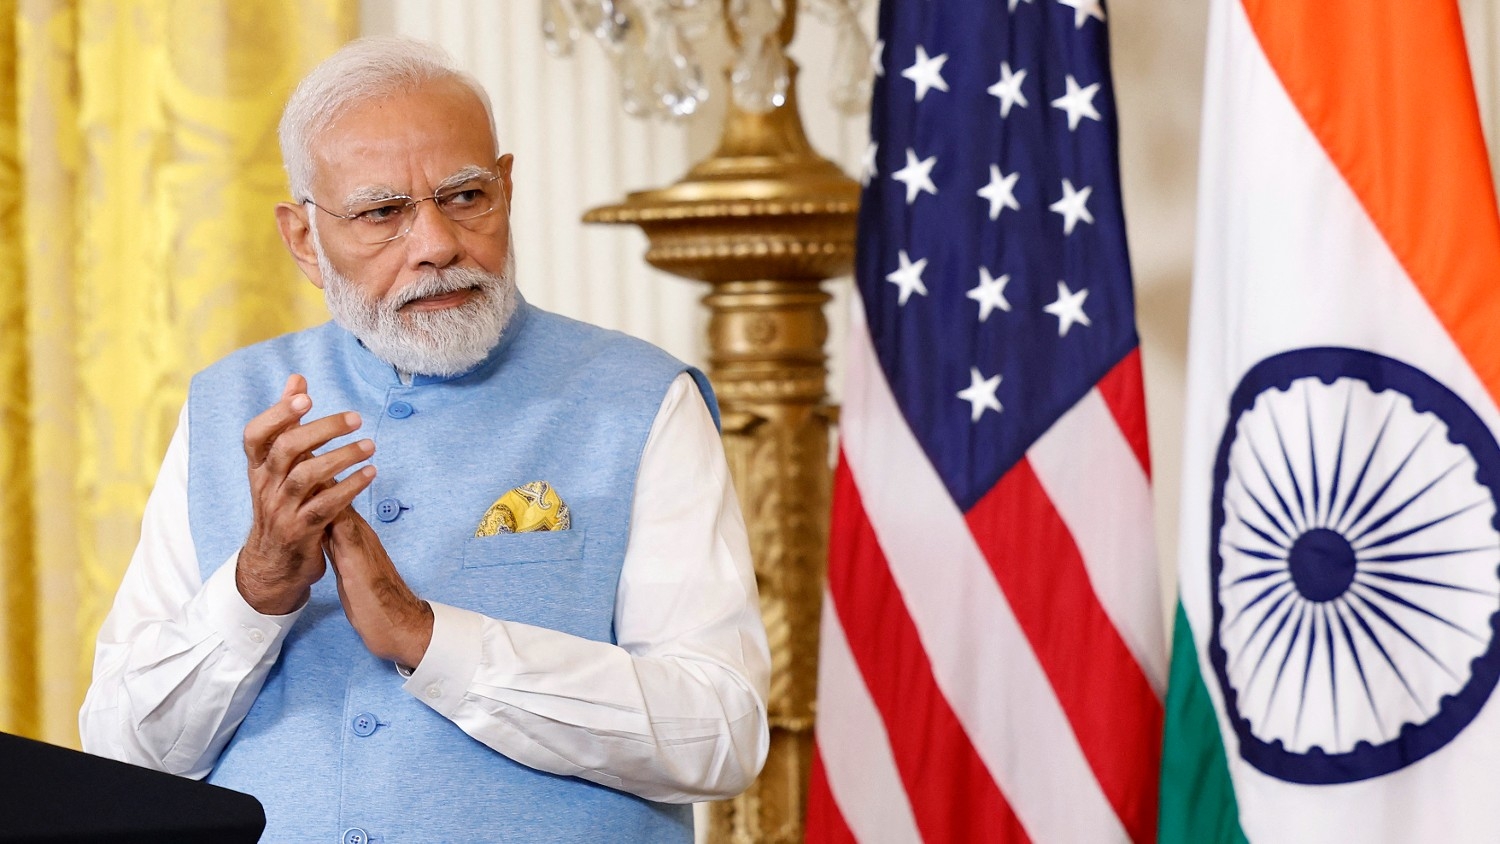 Indian Prime Minister Narendra Modi during a joint press conference with US President Joe Biden in Washington on 22 June 2023.